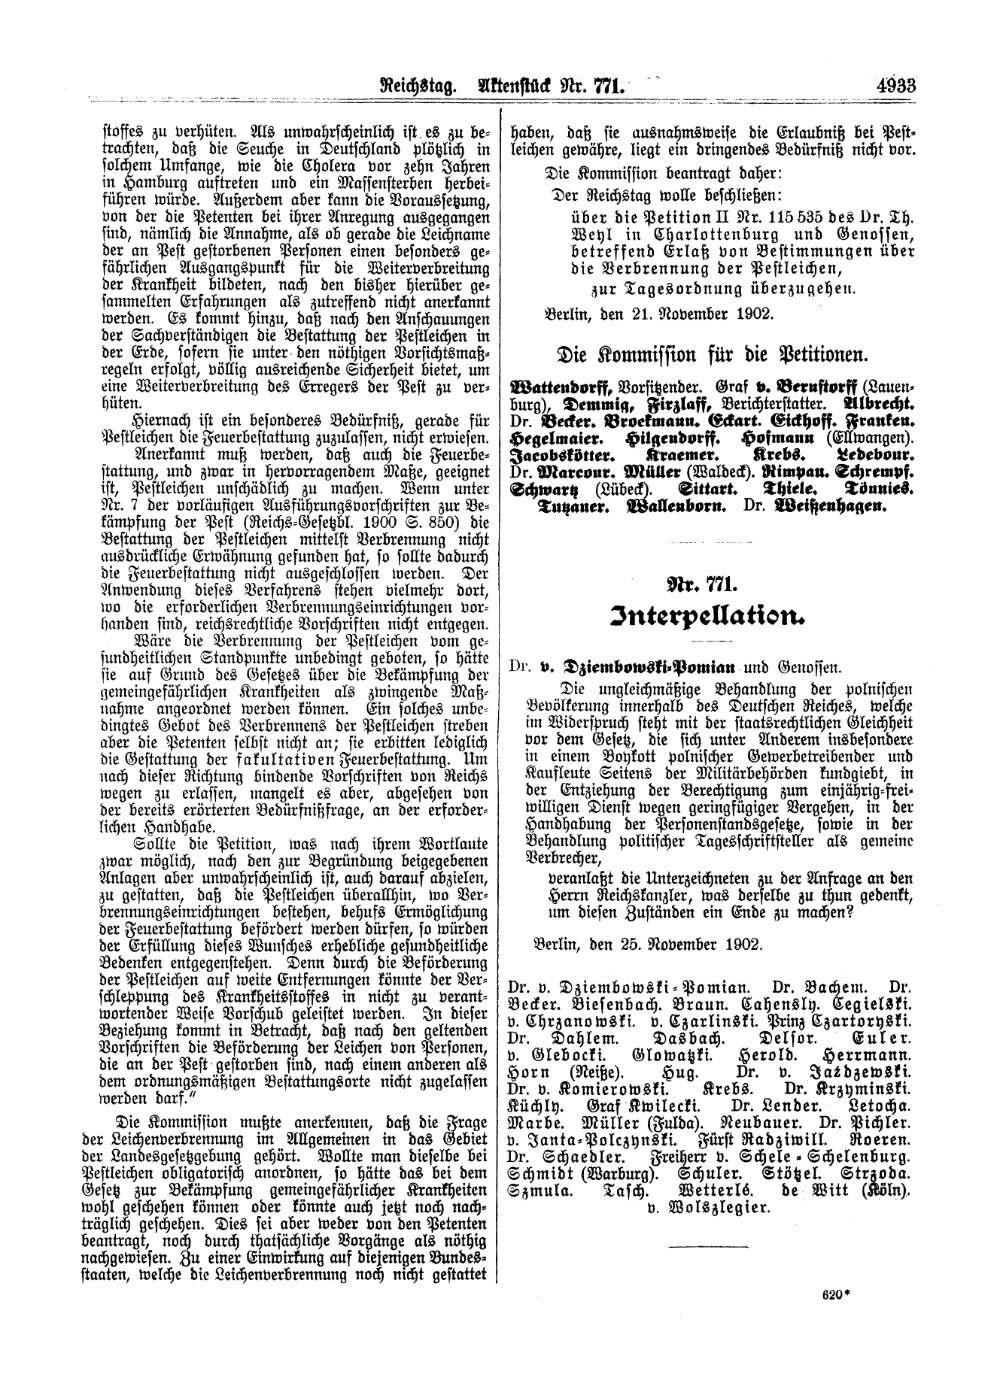 Scan of page 4933